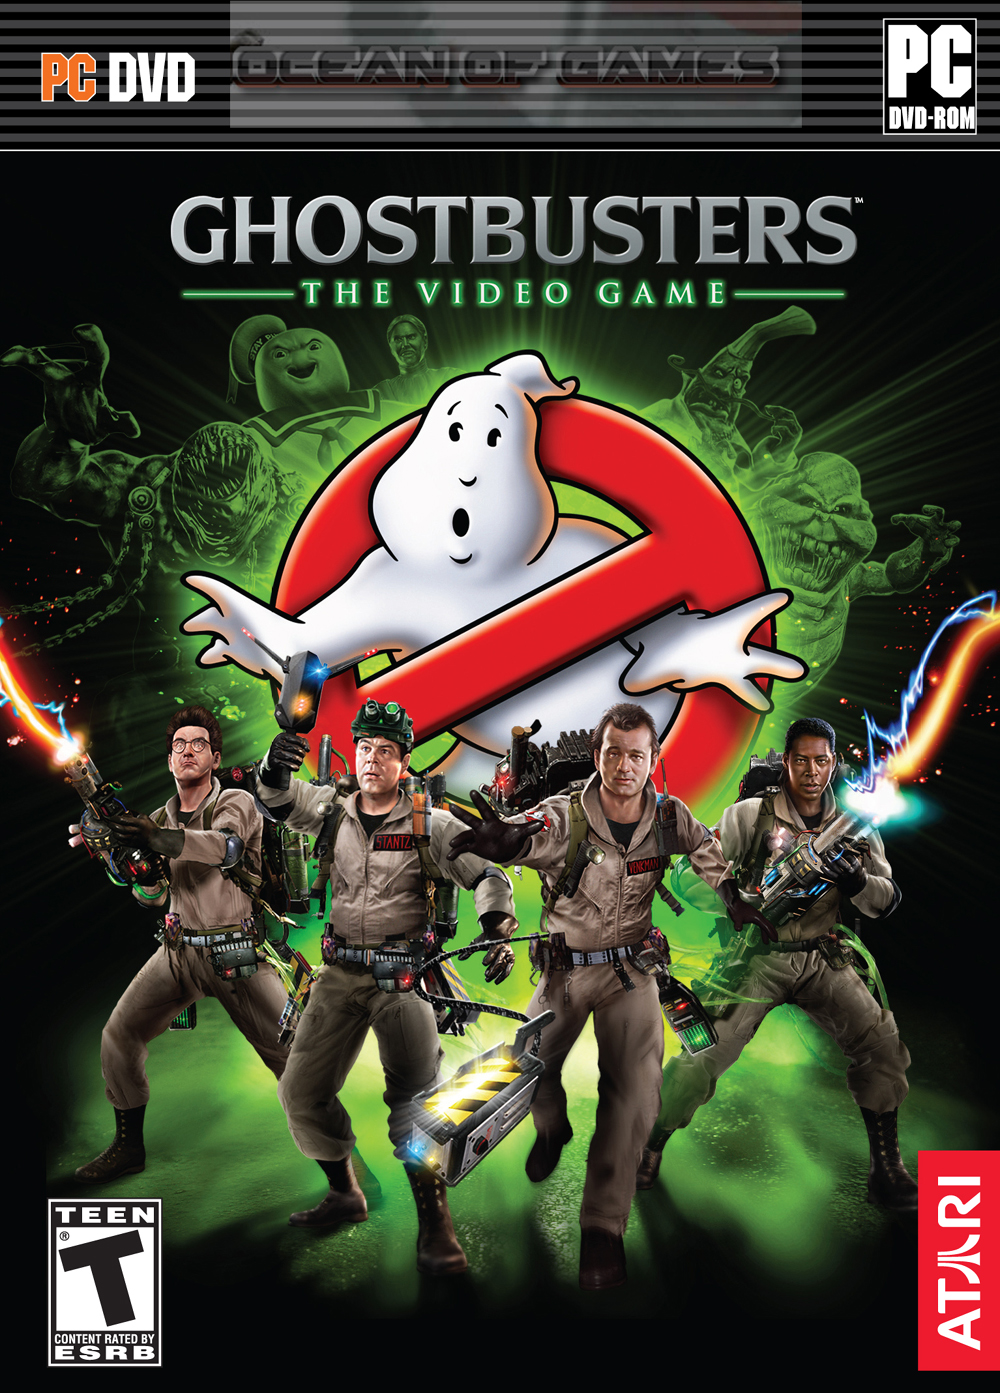 Free Ghostbusters Game